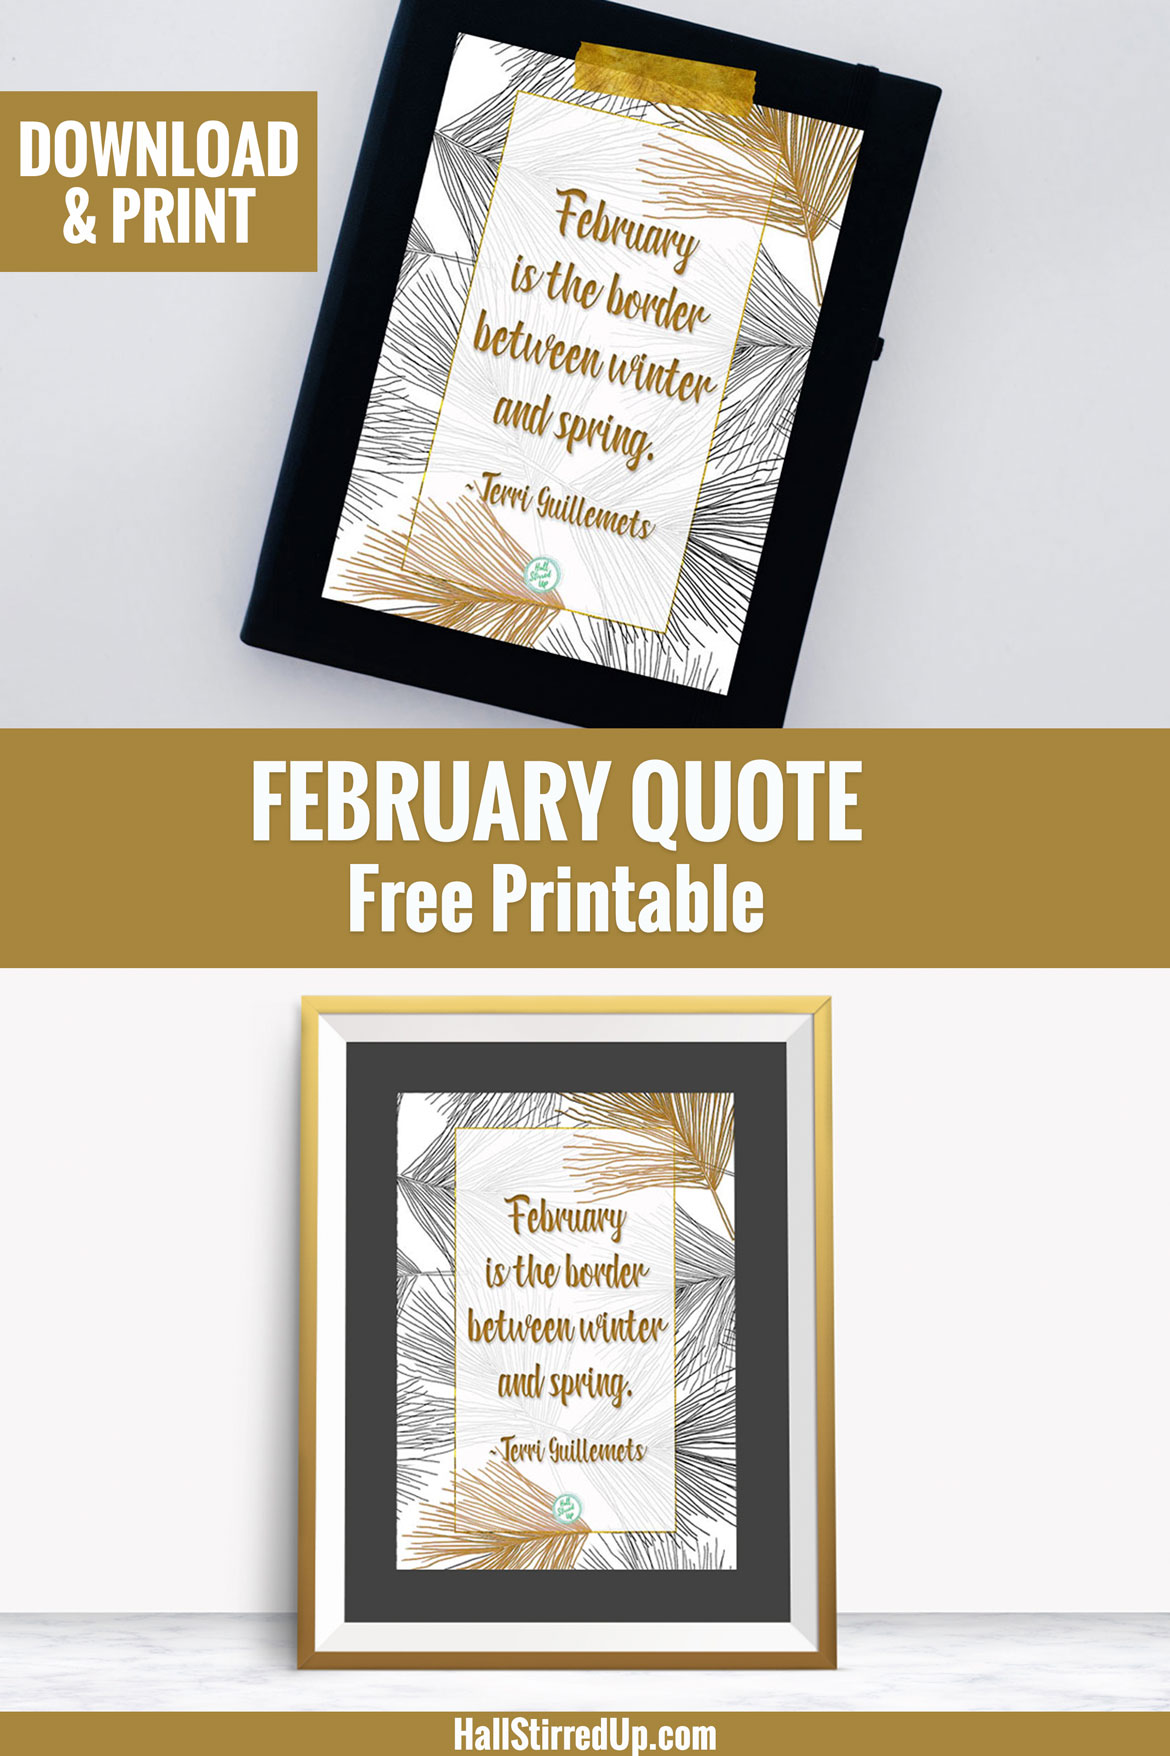 February Quote and a new free printable